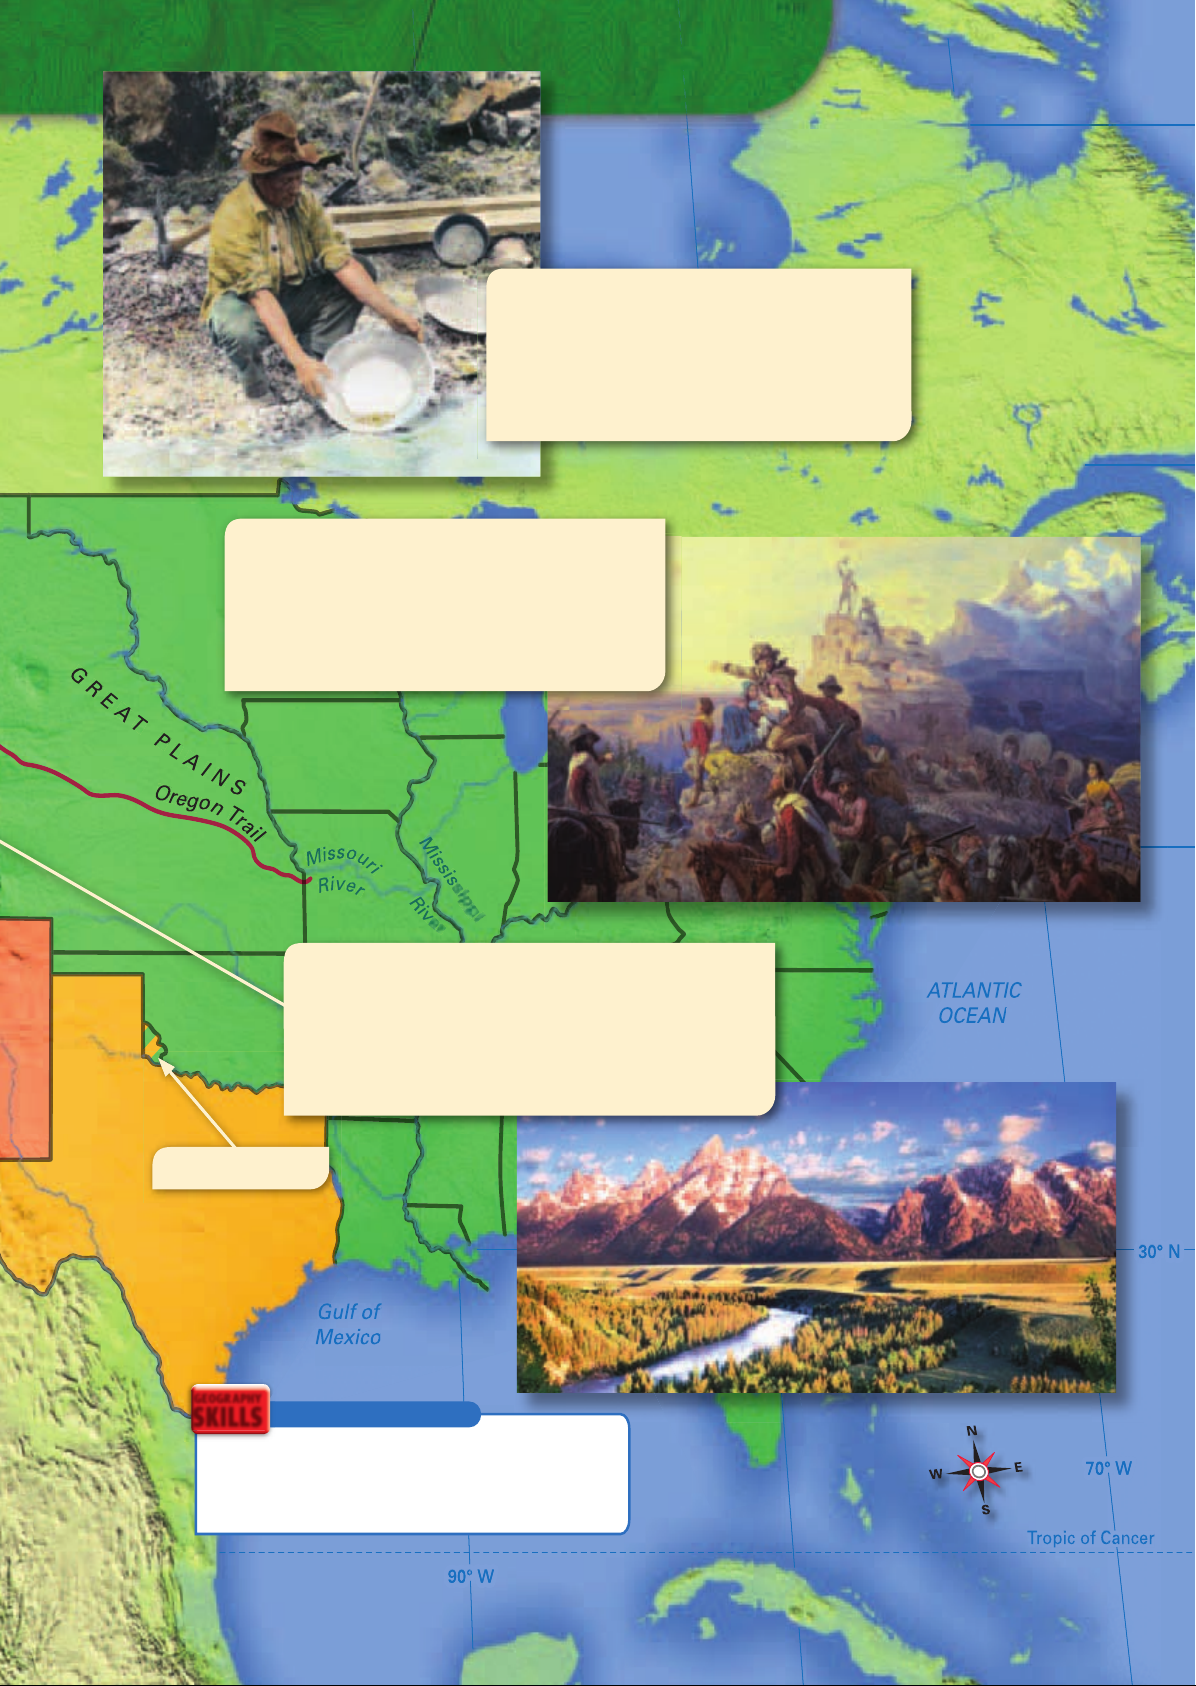 US_History_Textbook_8th_Grade_Chapter_10_Expanding_West_Part_2_Tn1P96Z Image-5